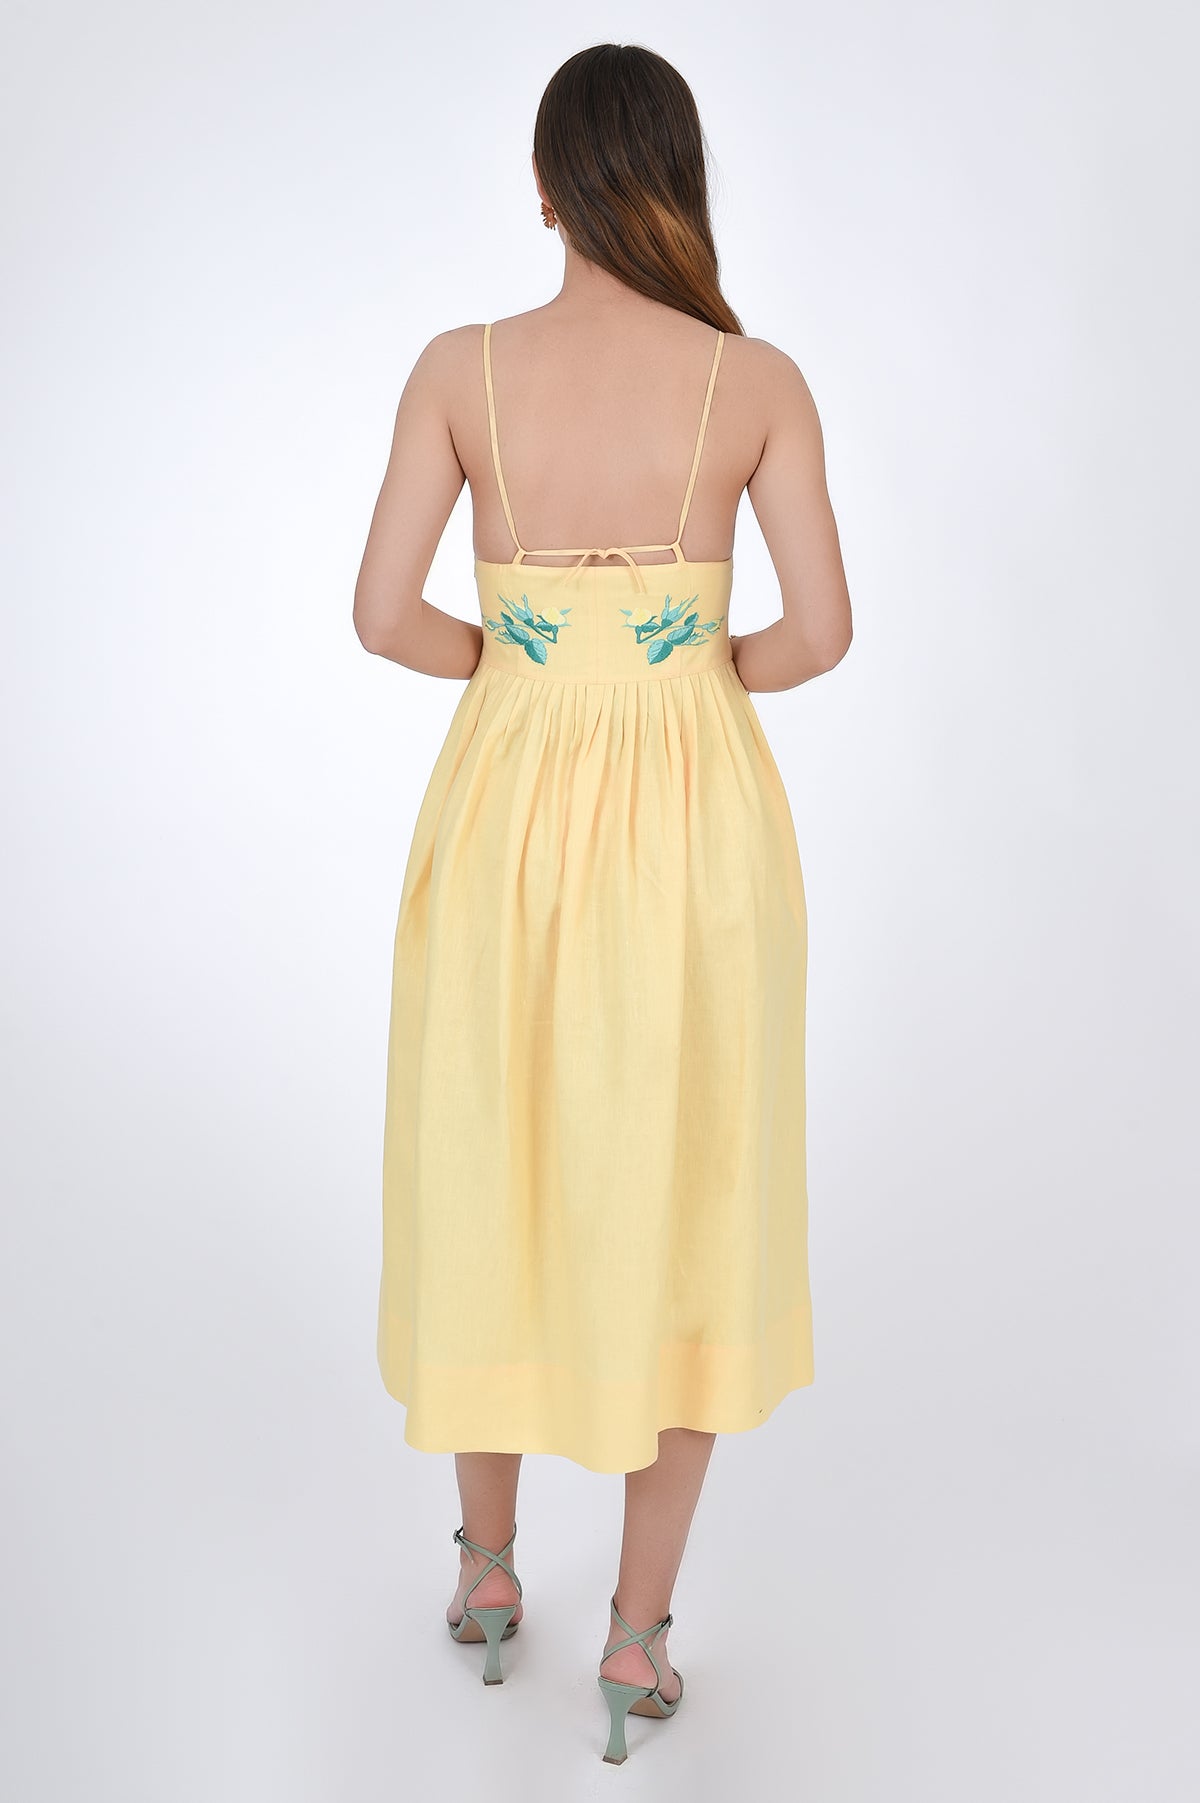 Fanm Mon Emile Embroidered Linen Dress, Back View. Midi Length Linen Dresswith a flattering silhouette features spaghetti straps. 